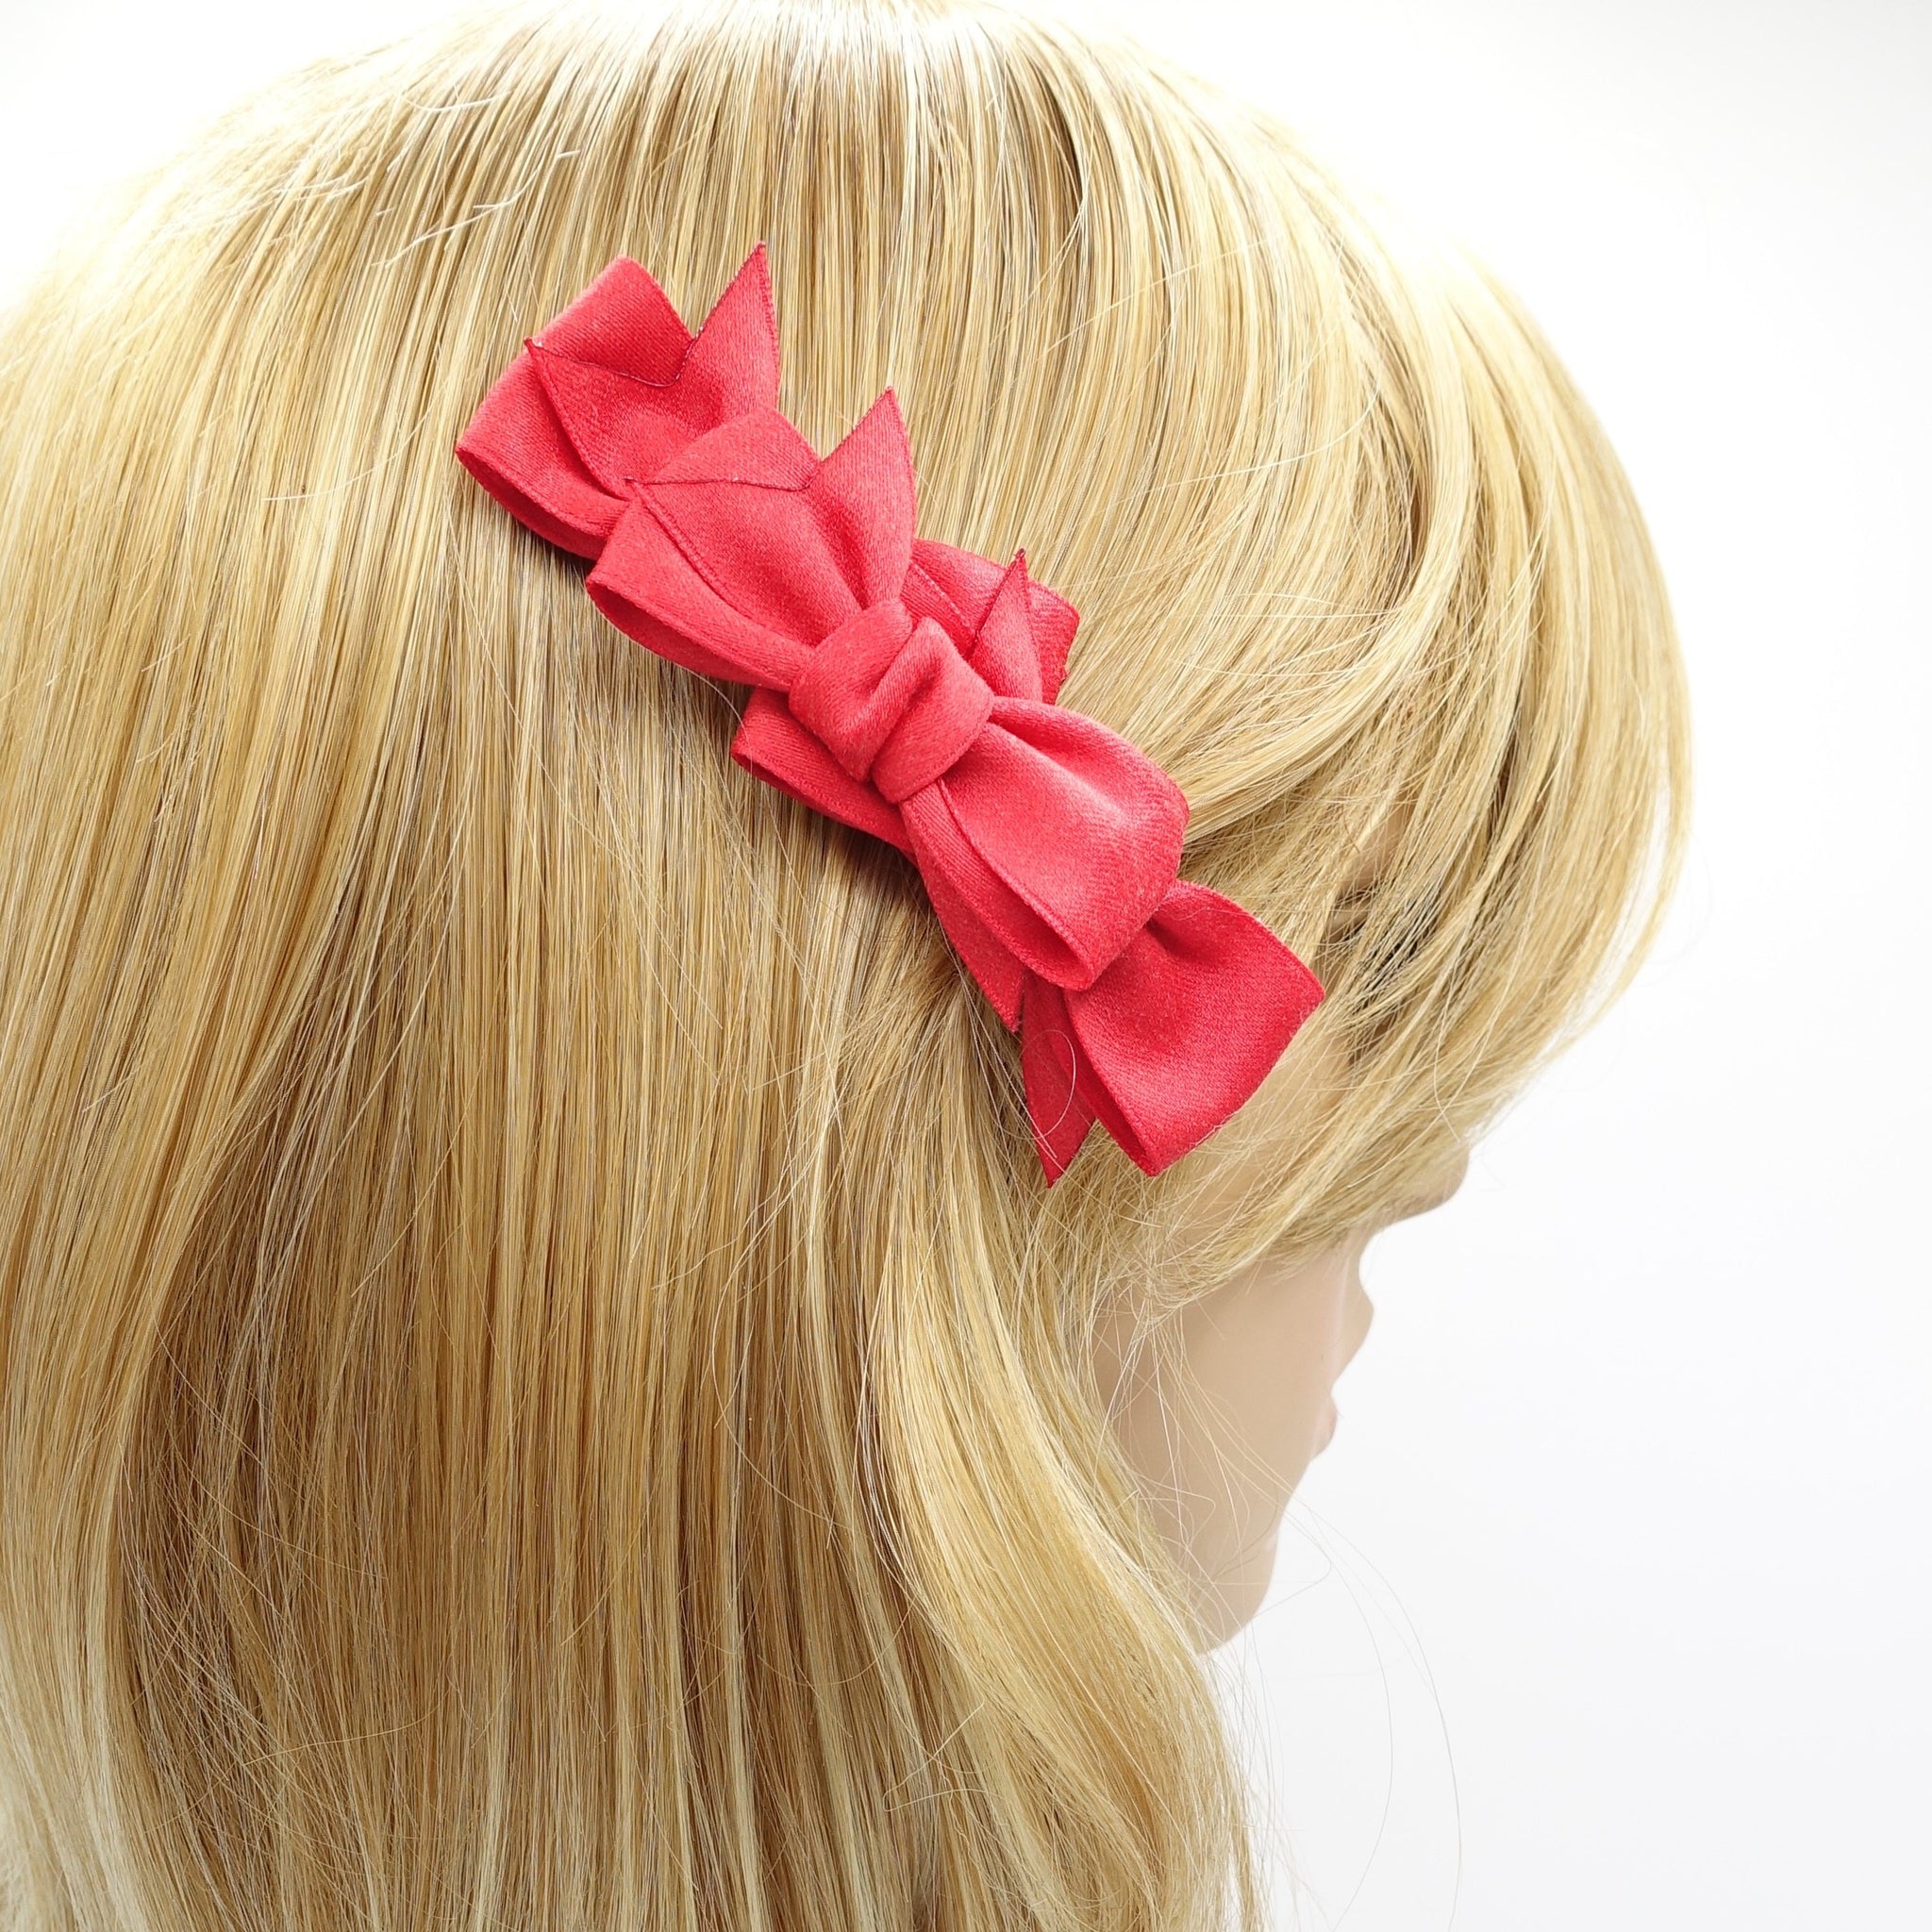 VeryShine claw/banana/barrette Red 3 mini satin bow decorated 2 prong hair clip women hair accessory